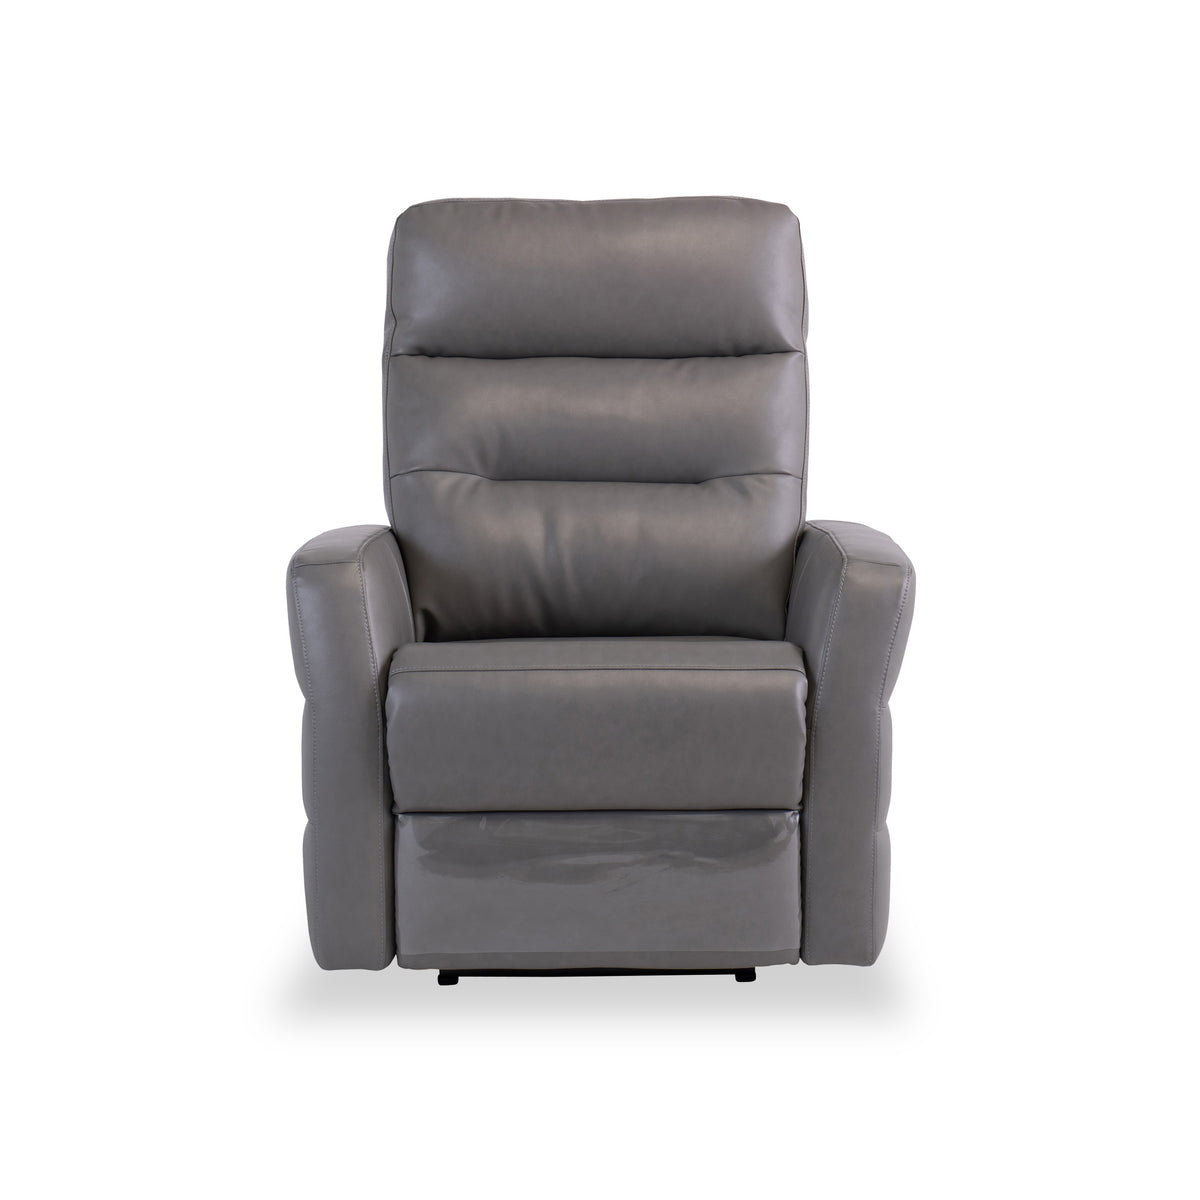 Harlem Grey Leather Electric Reclining Armchair from Roseland Furniture